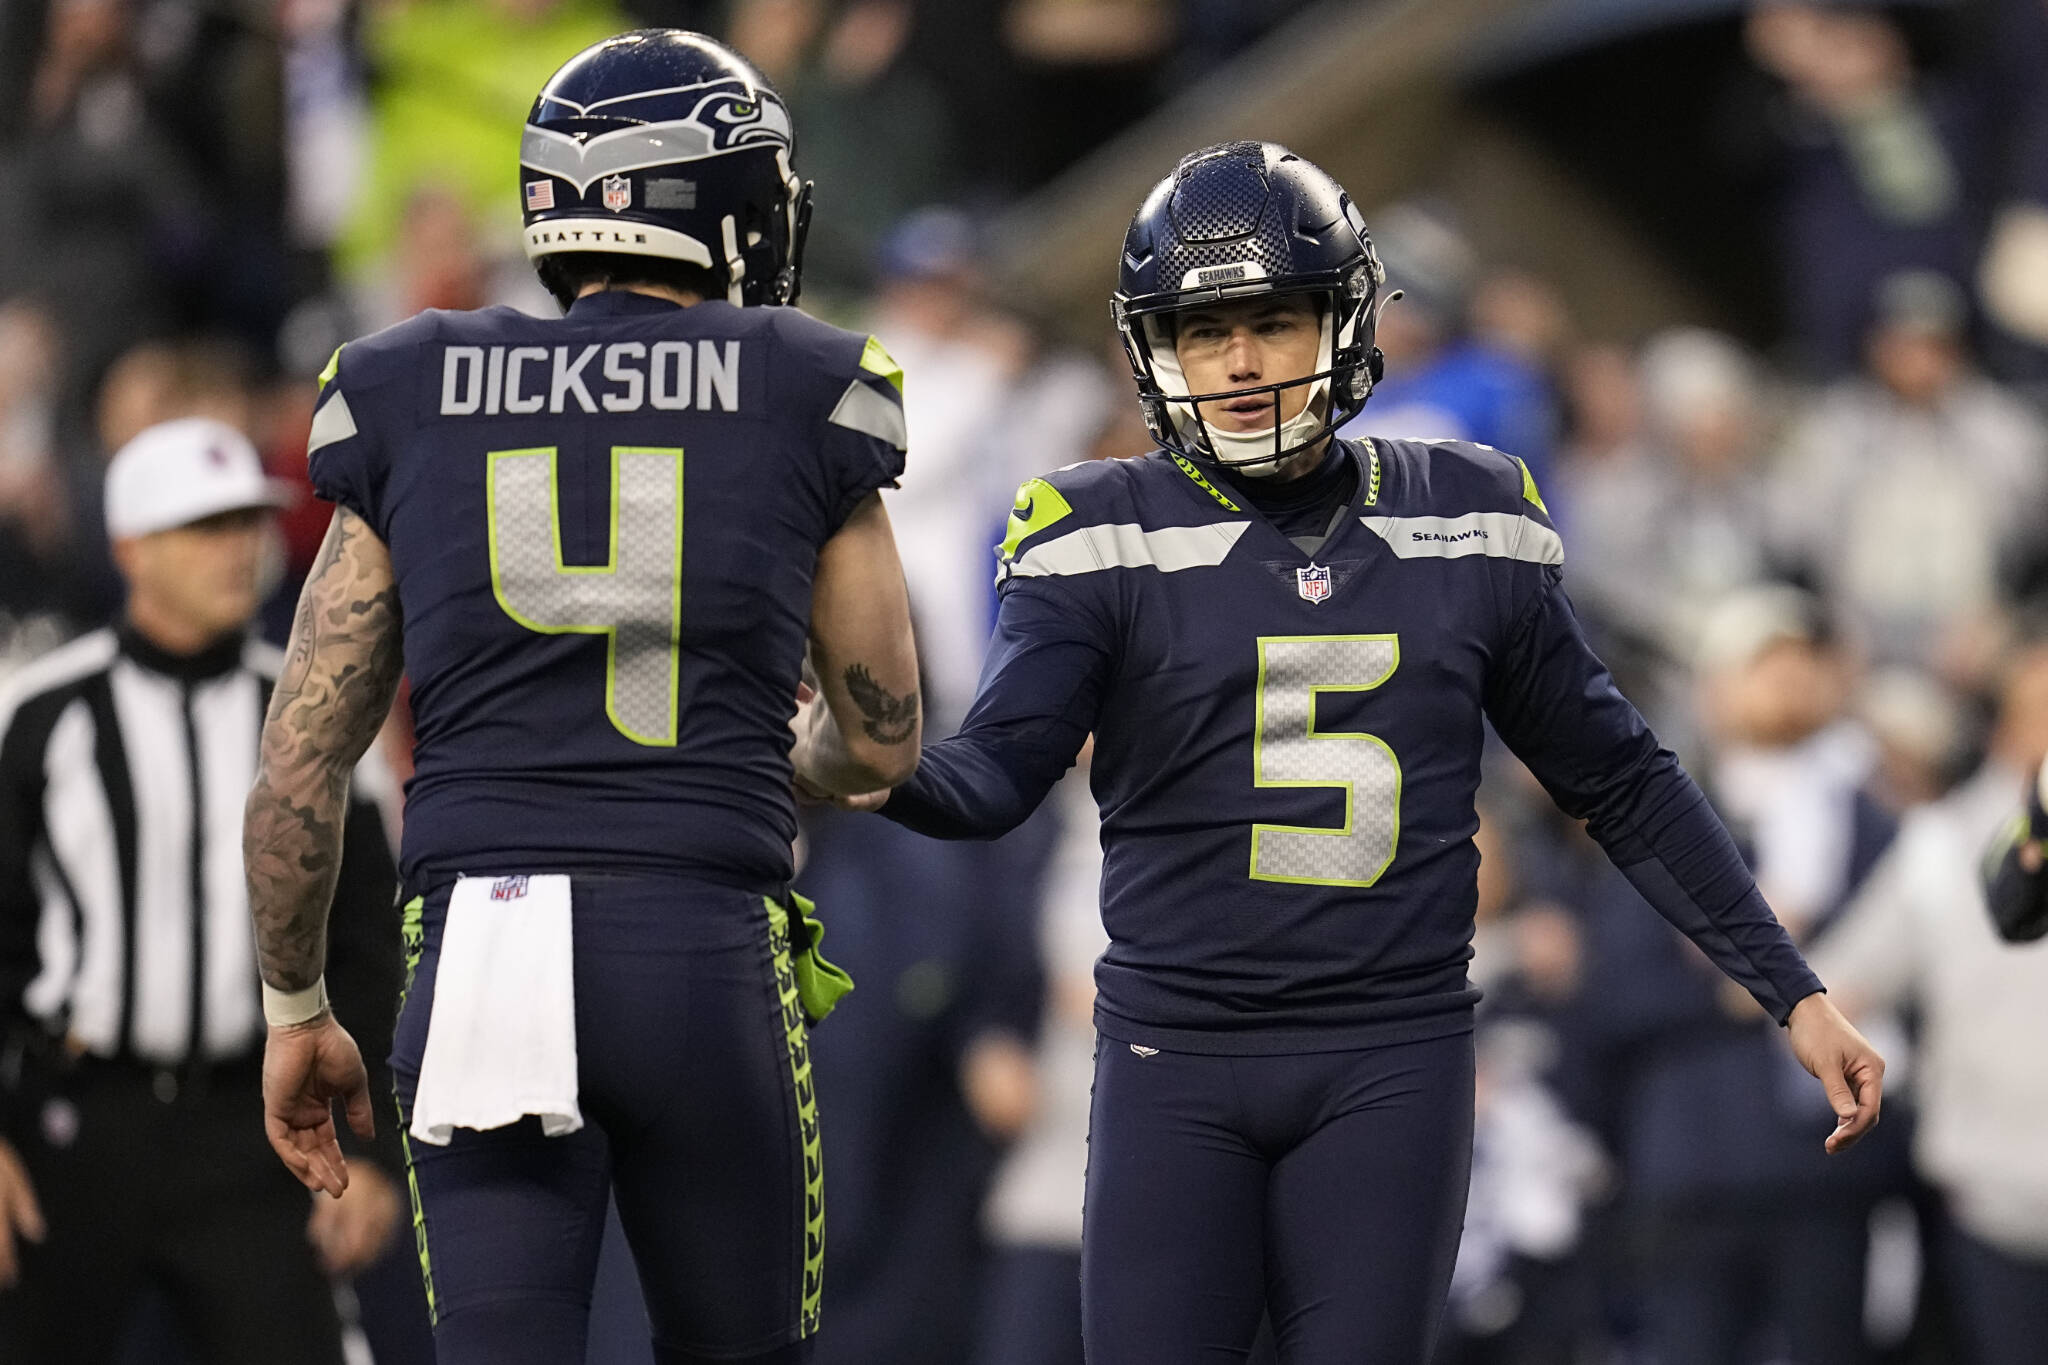 Seahawks kicker Jason Myers (5) shakes hands with holder and punter Michael Dickson after Myers’ game-winning field goal in overtime of a game against the Rams on Jan. 8, 2023, in Seattle. (AP Photo/Abbie Parr)